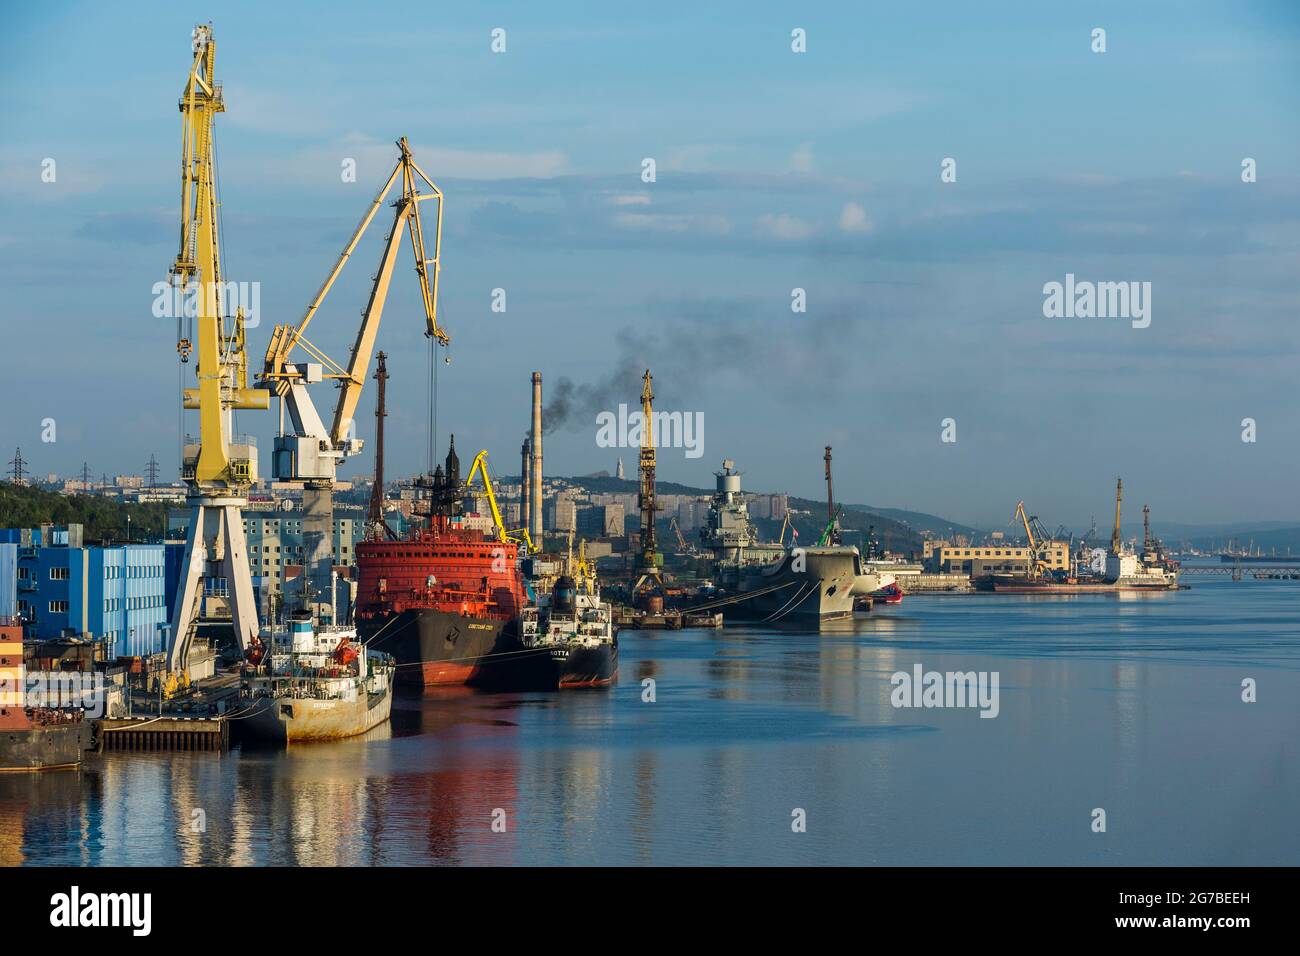 The harbour of Murmansk, Russia Stock Photo